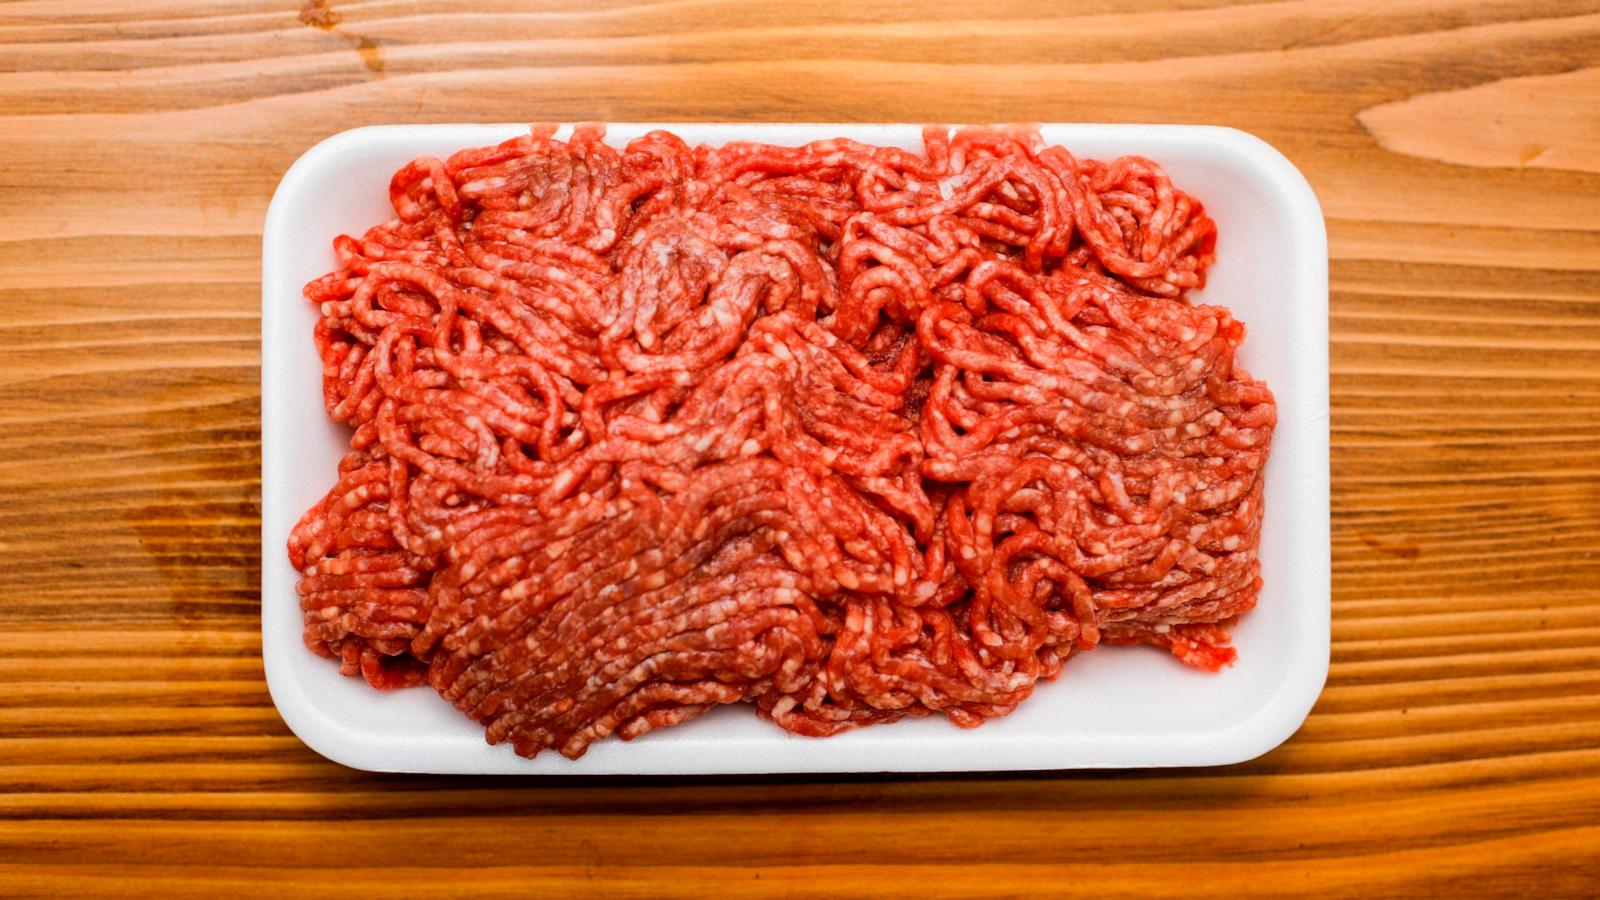 More than 6,700 pounds of raw ground beef recalled due to E. coli concerns  - ABC News